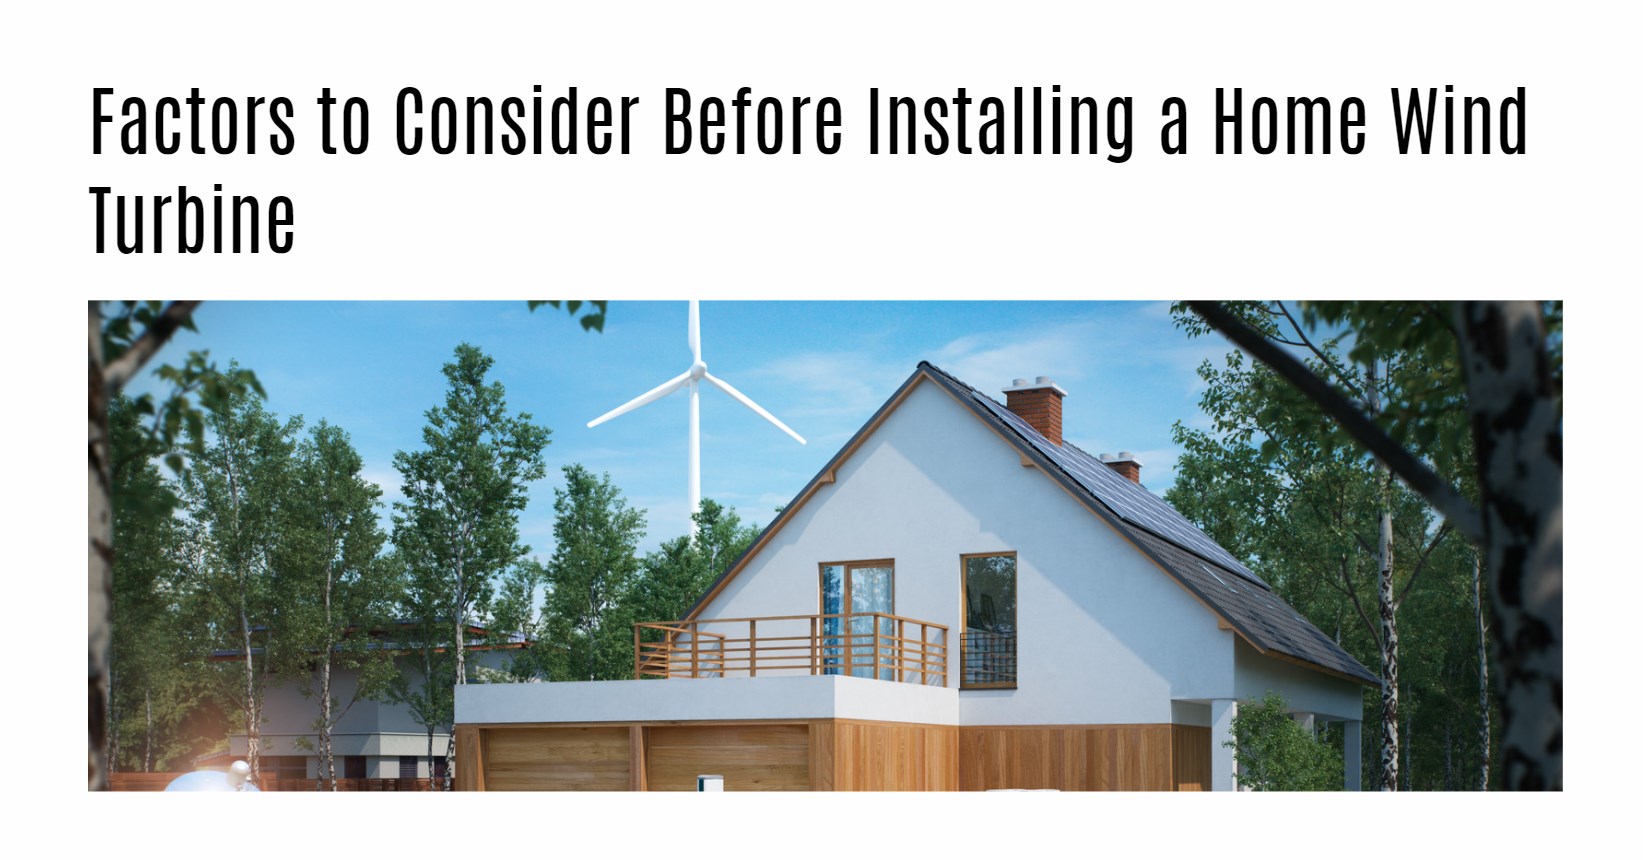 Factors to Consider Before Installing a Home Wind Turbine